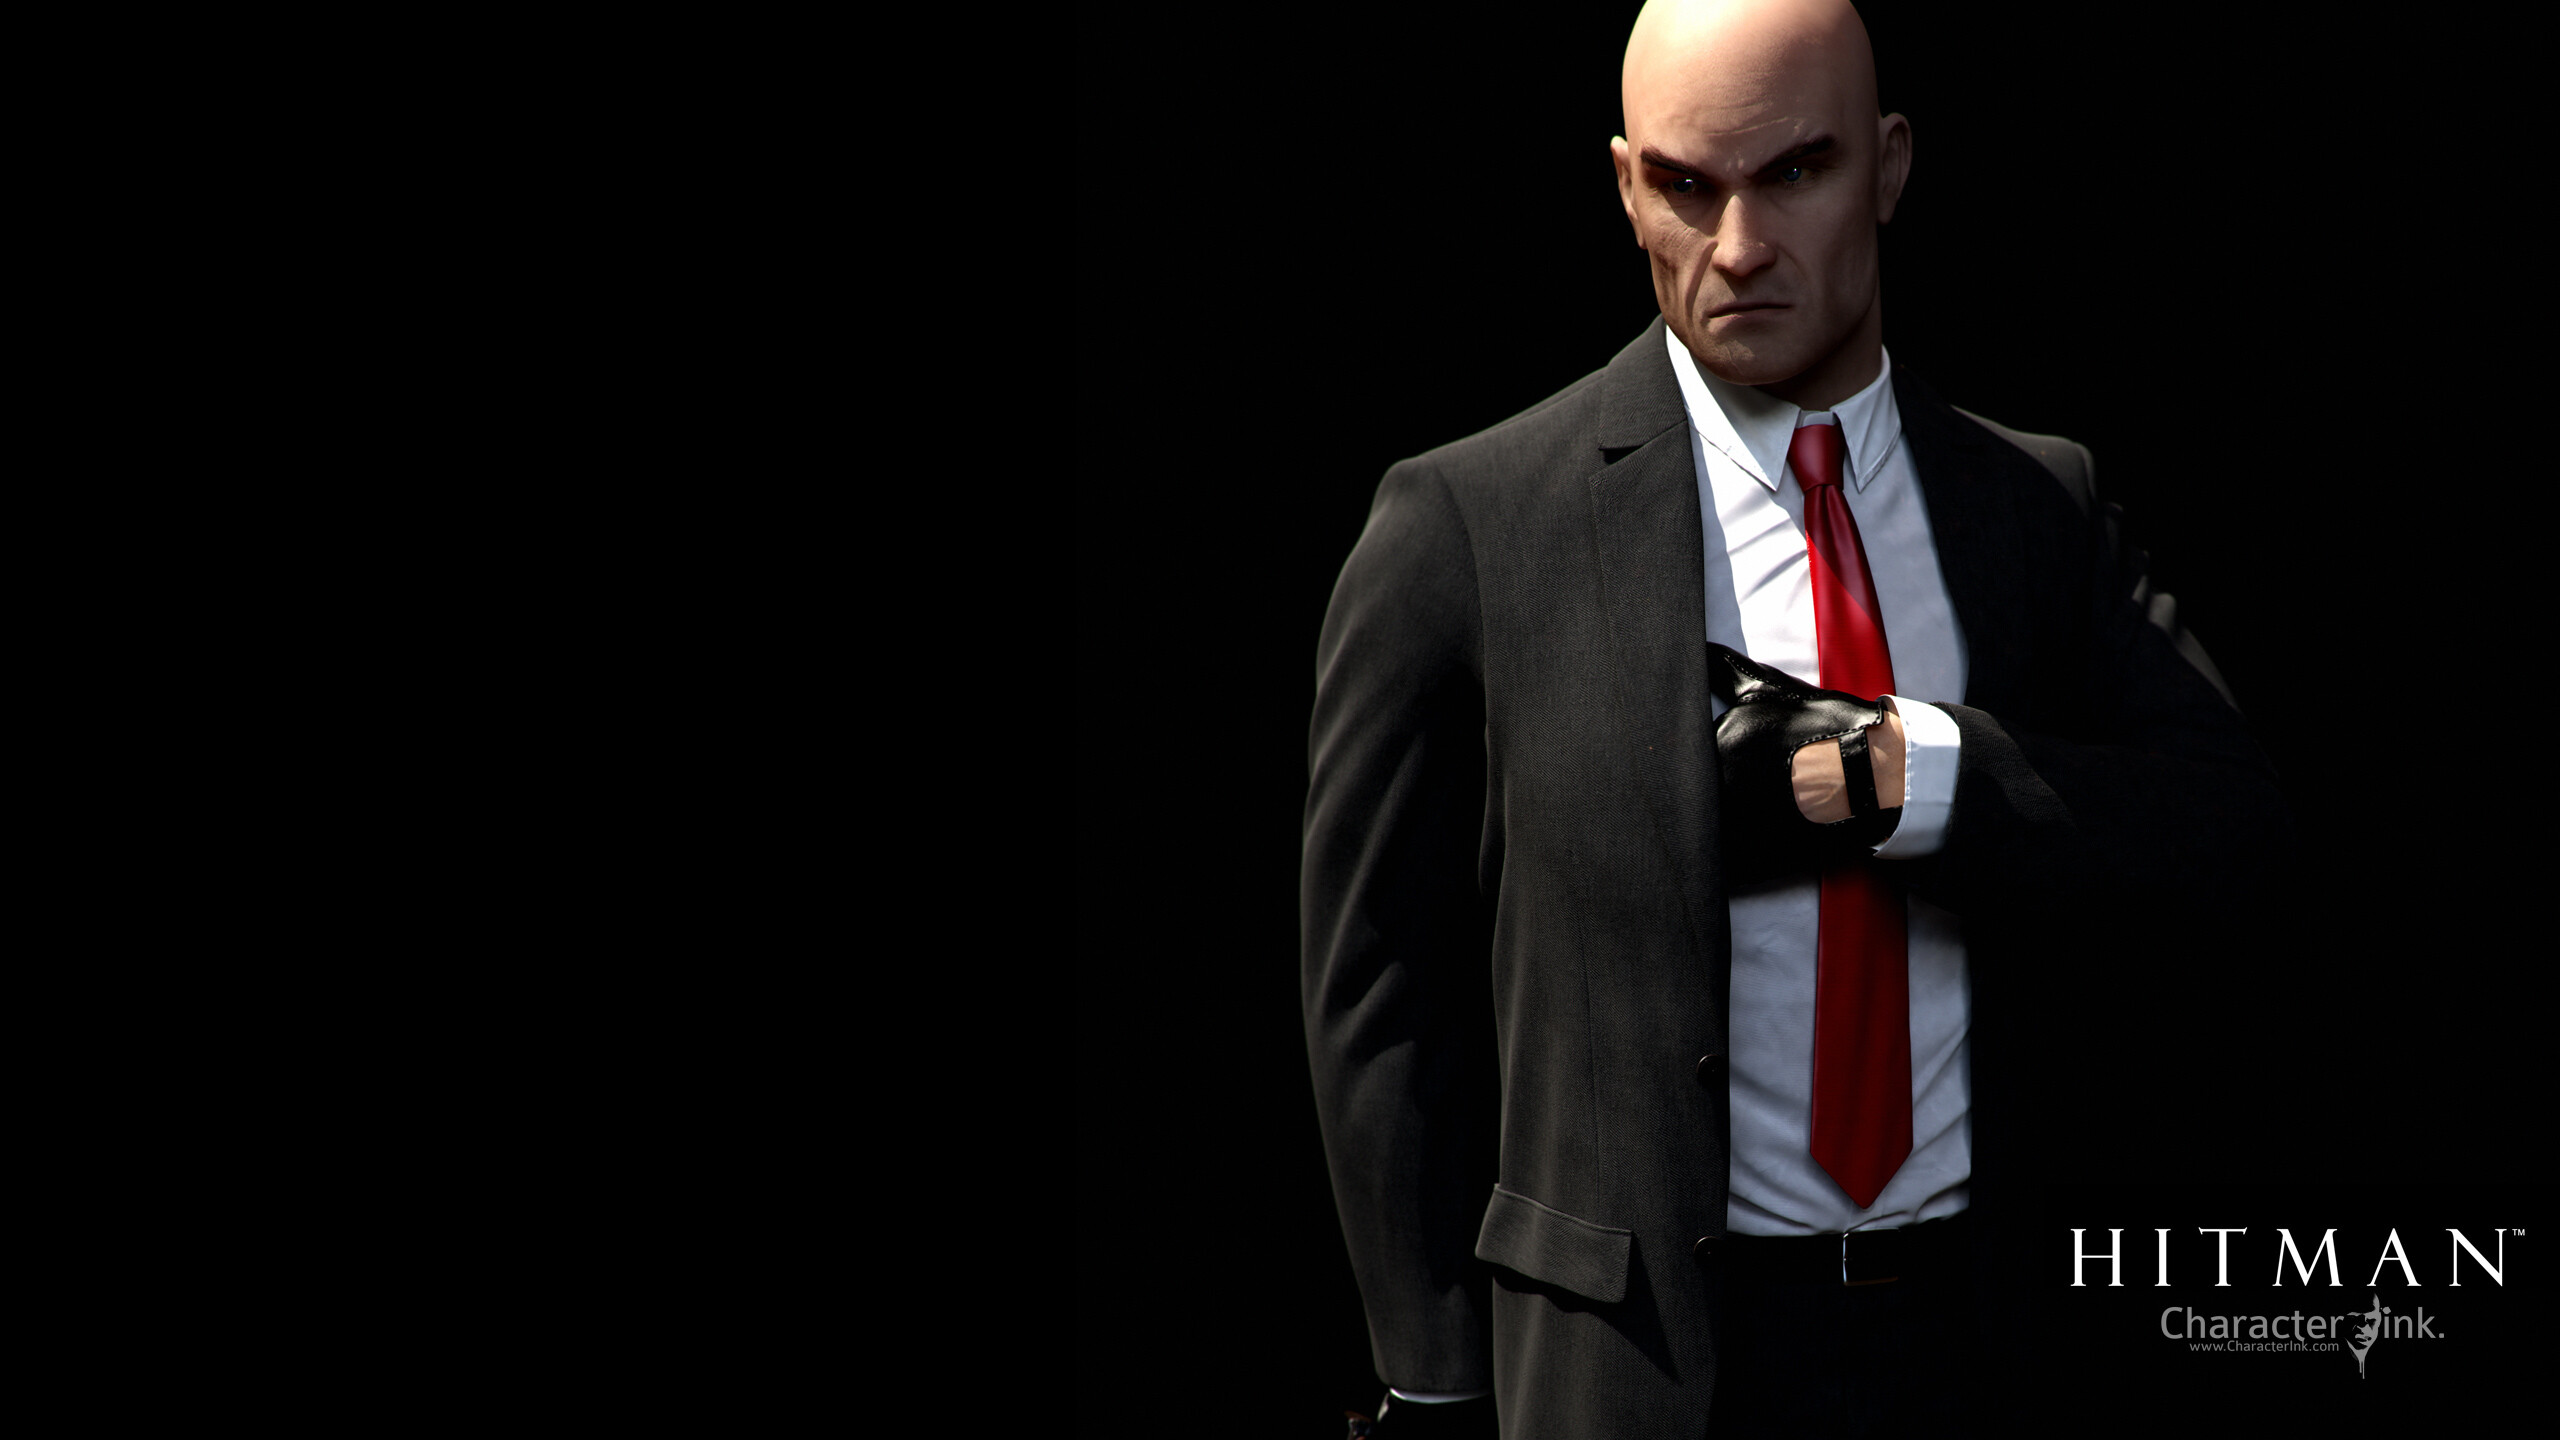 Hitman game, Agent 47 wallpaper, Dreamlovewallpapers submission, Desktop and mobile theme, 2560x1440 HD Desktop